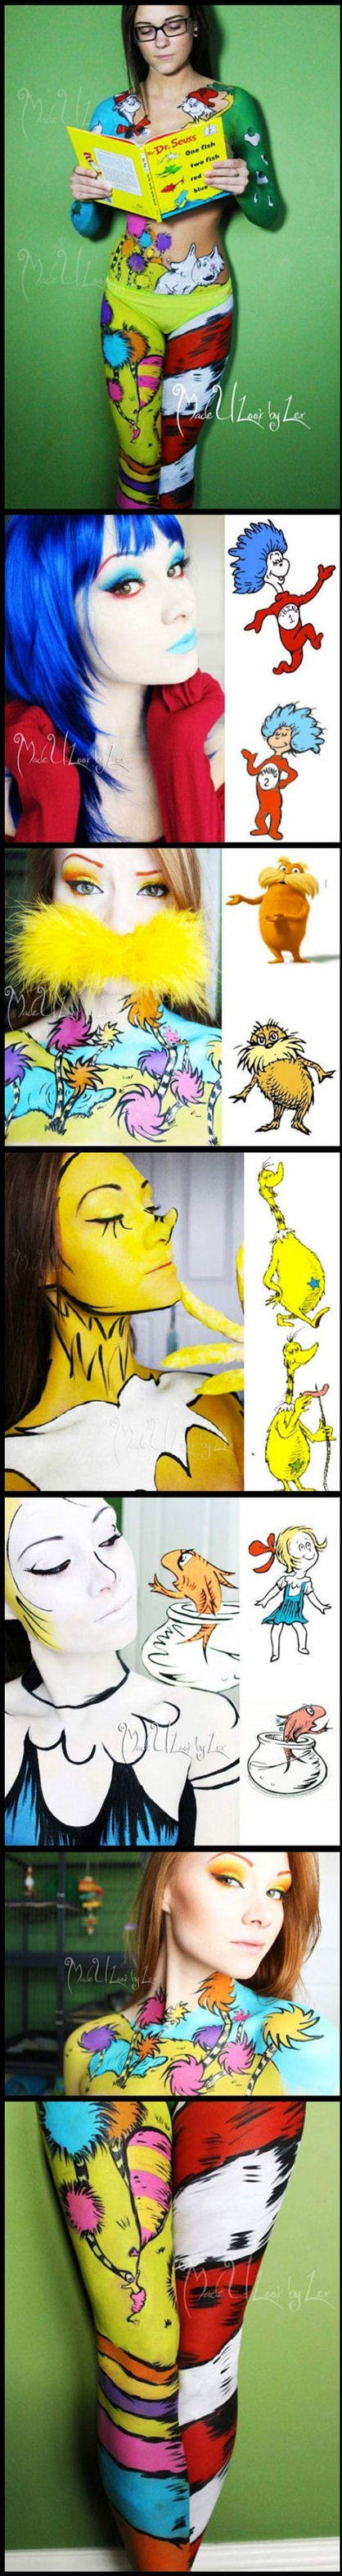 Artist, Alexys Flemming,recreates Dr Seuss art in the form of body painting -   Misc